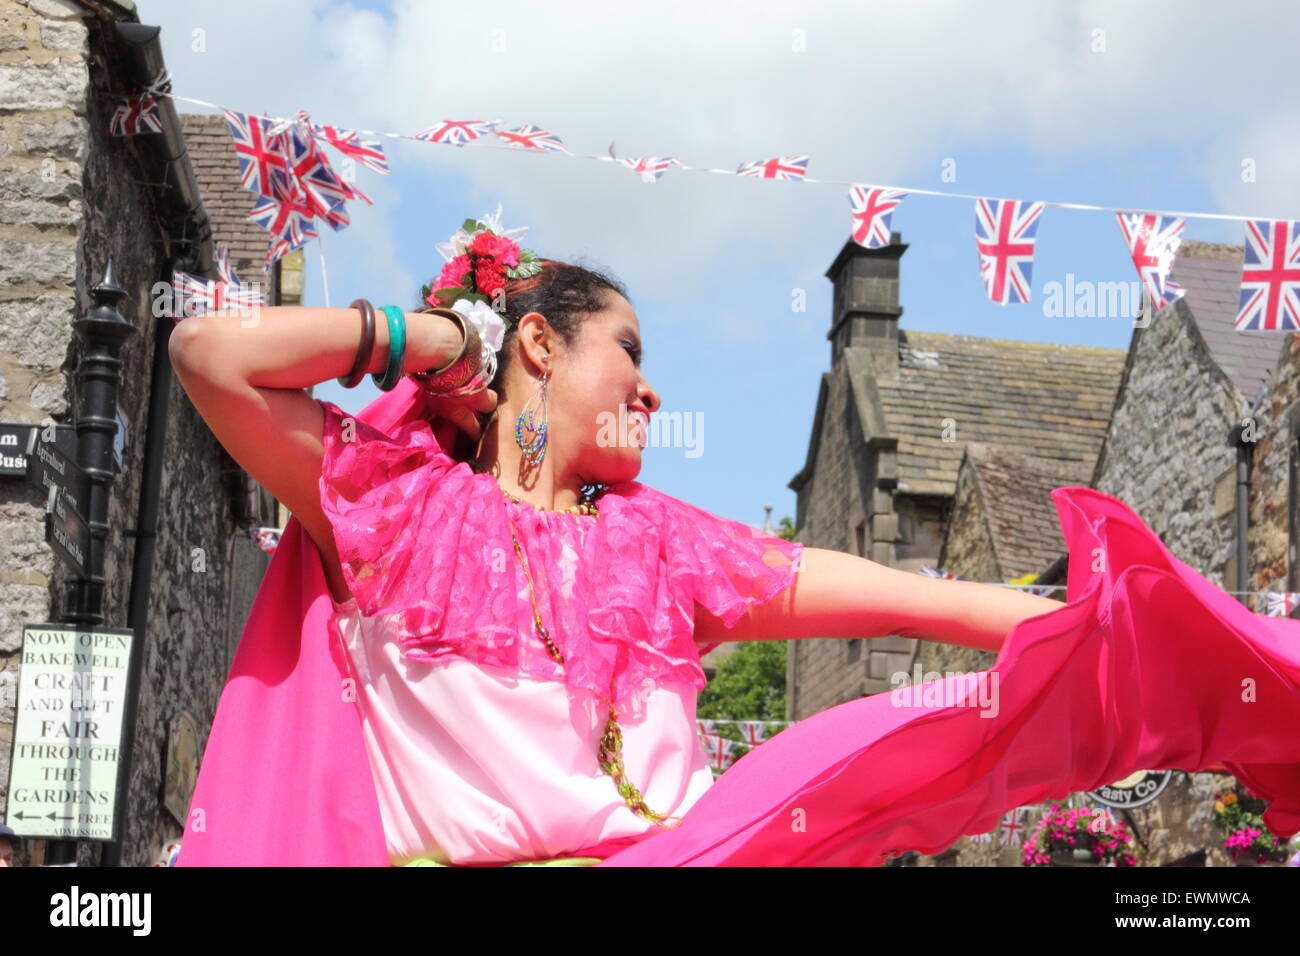 Members of LAtin American dance group, Son de America perform at the Bakewell International Day of Dance, Bakewell, England UK Stock Photo